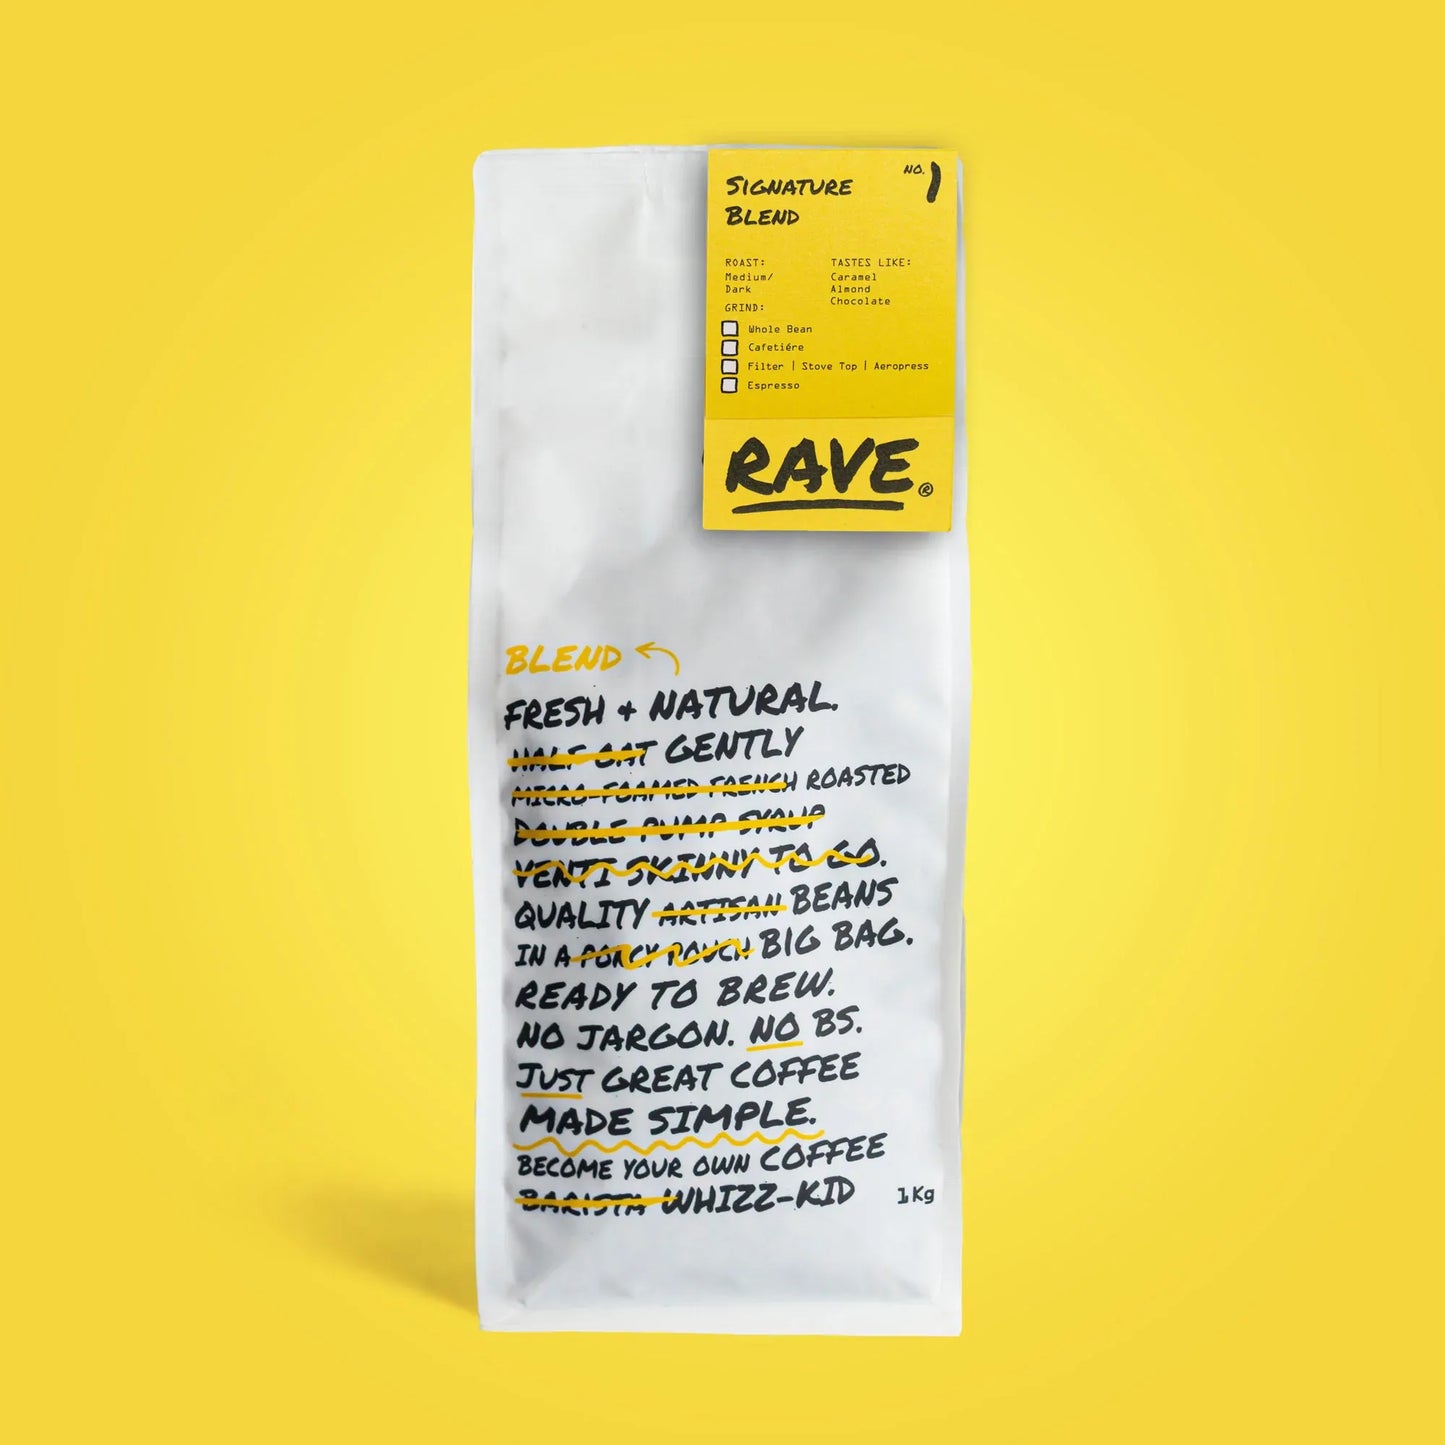 The Rave Coffee Beans